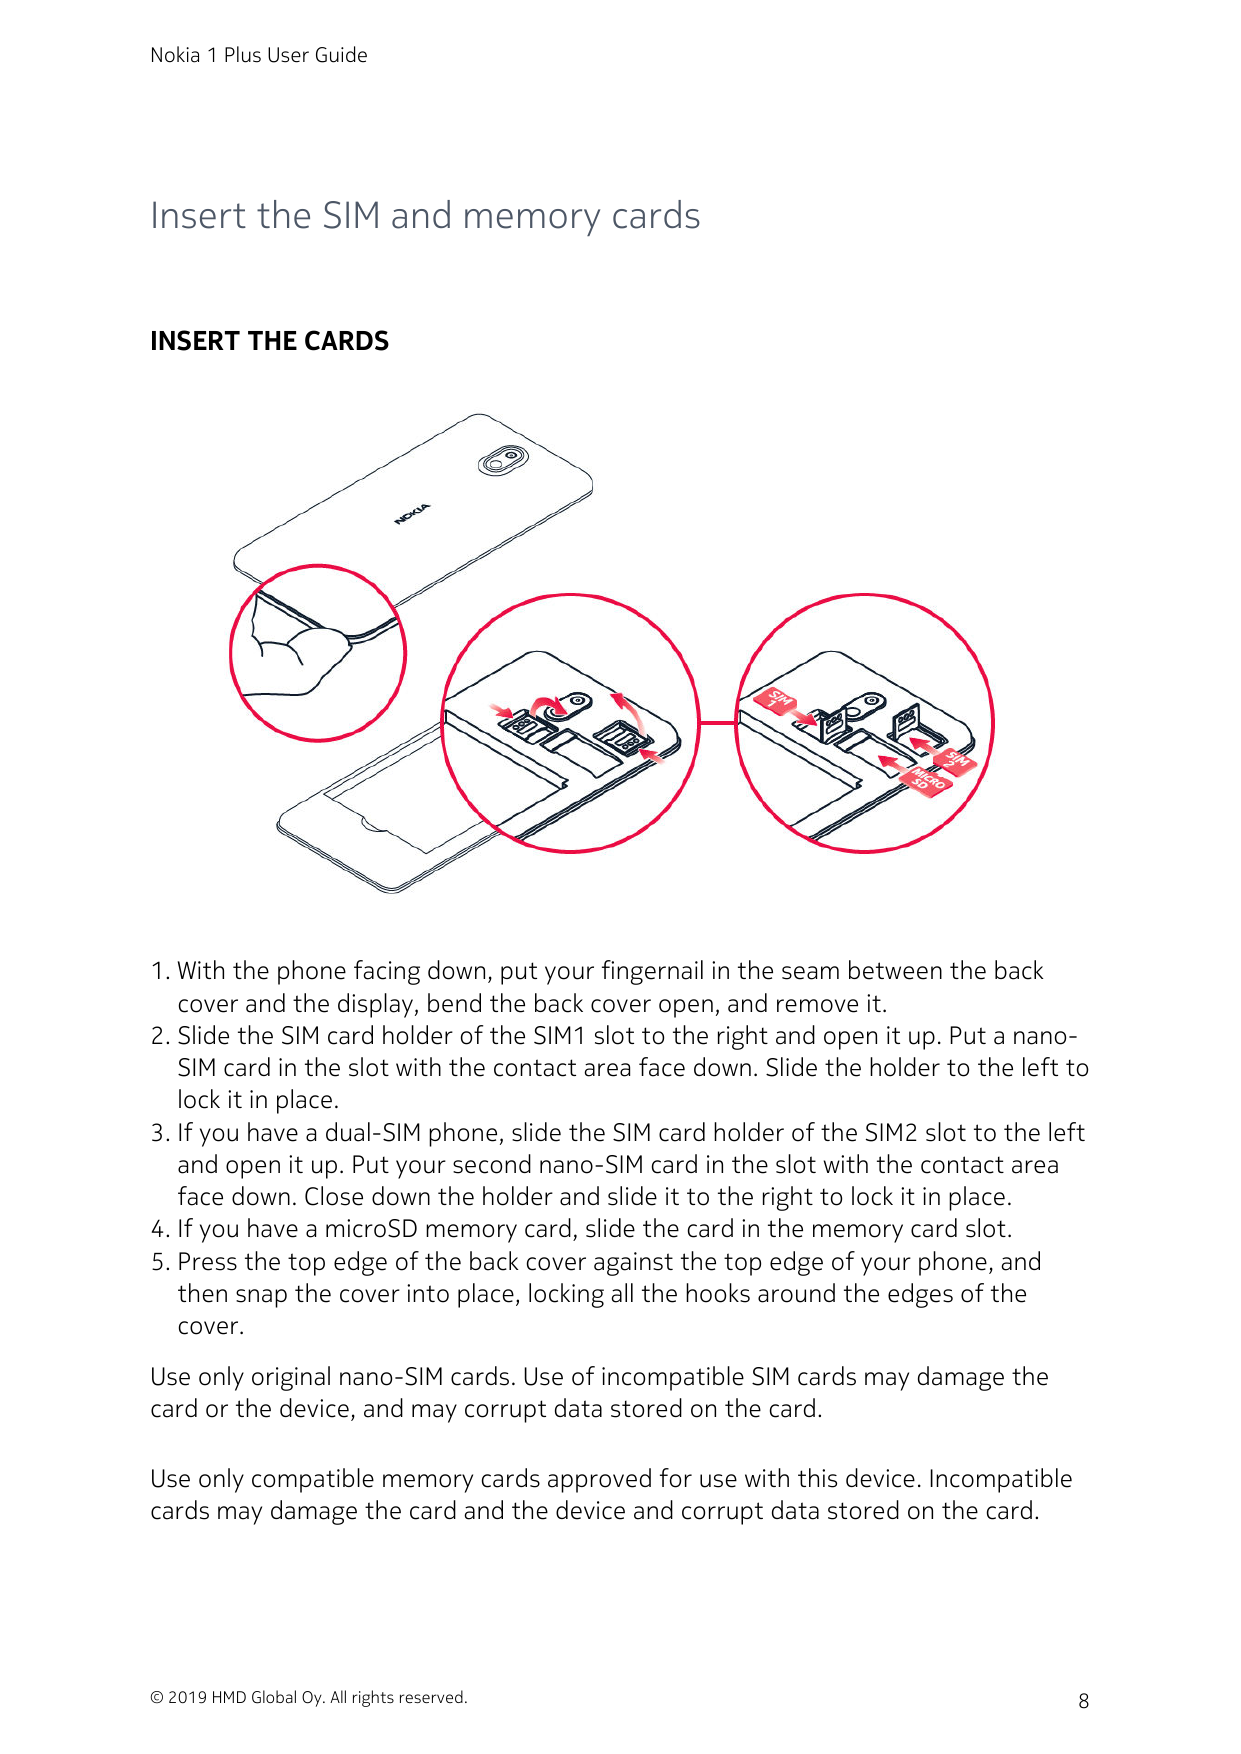 Nokia 1 Plus User GuideInsert the SIM and memory cardsINSERT THE CARDS1. With the phone facing down, put your fingernail in the 